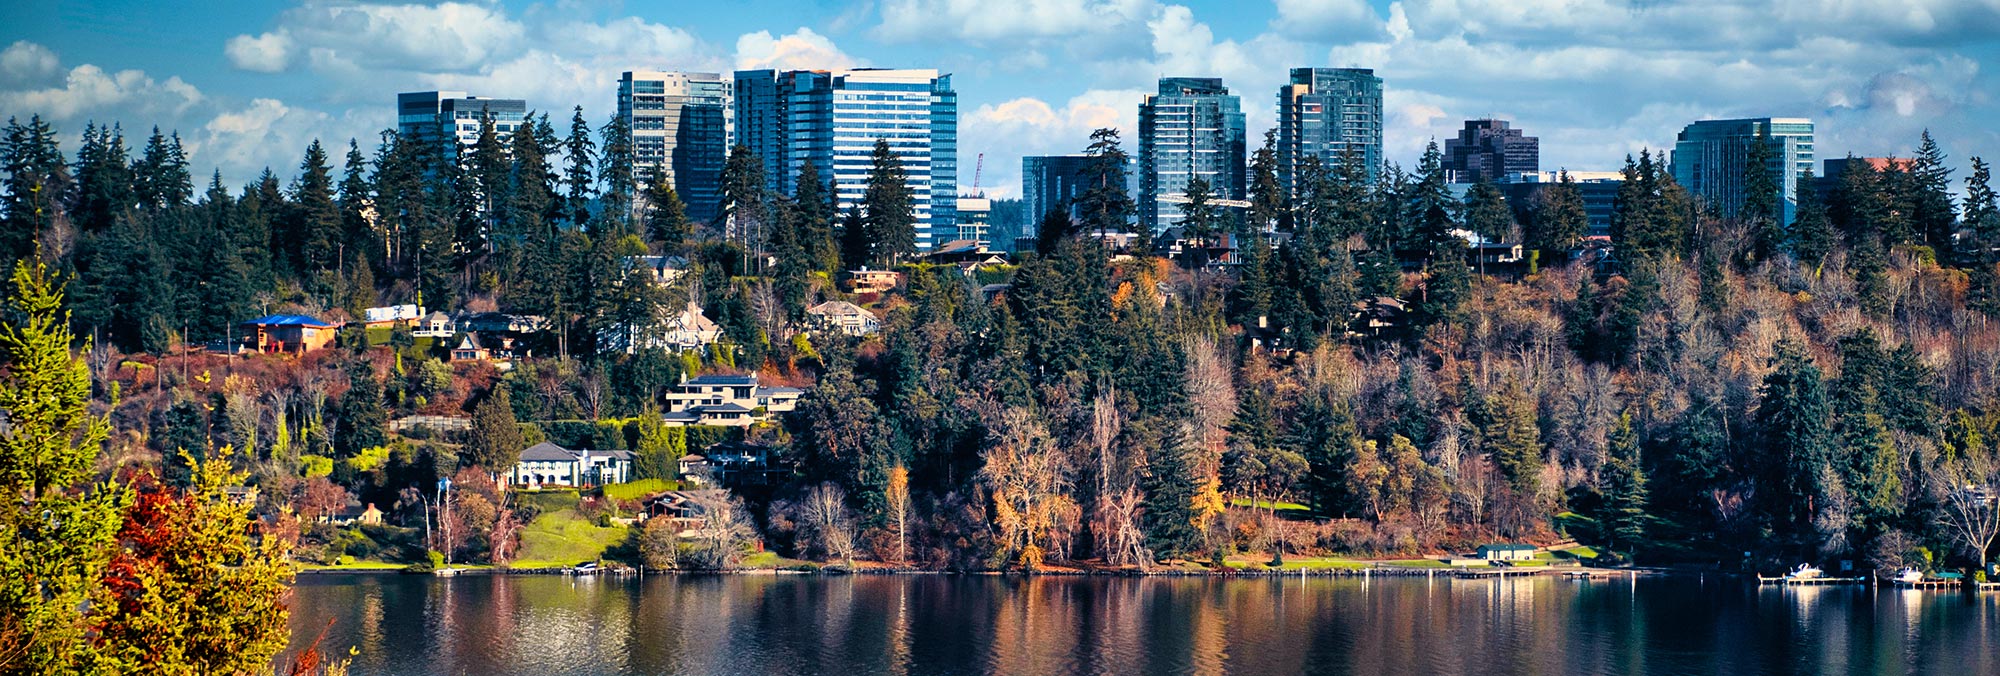 City scape scenery of Bellevue with skyline and many trees, homes, and lake in the forefront